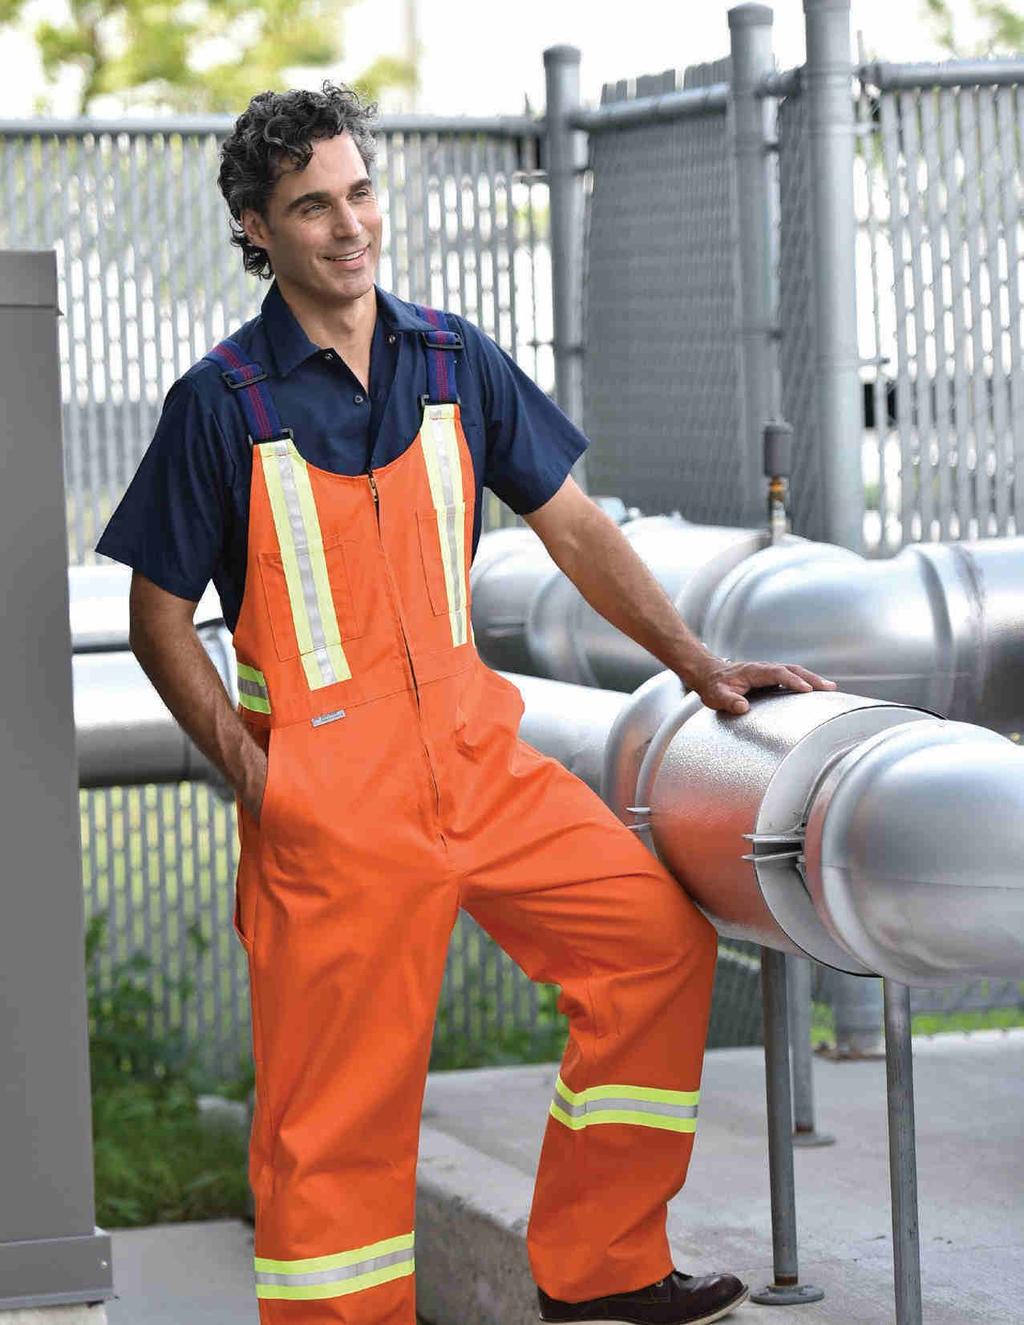 HI VIS 100% Cotton Orange Bib Overalls with Reflective Tape Essential work wear in any number of